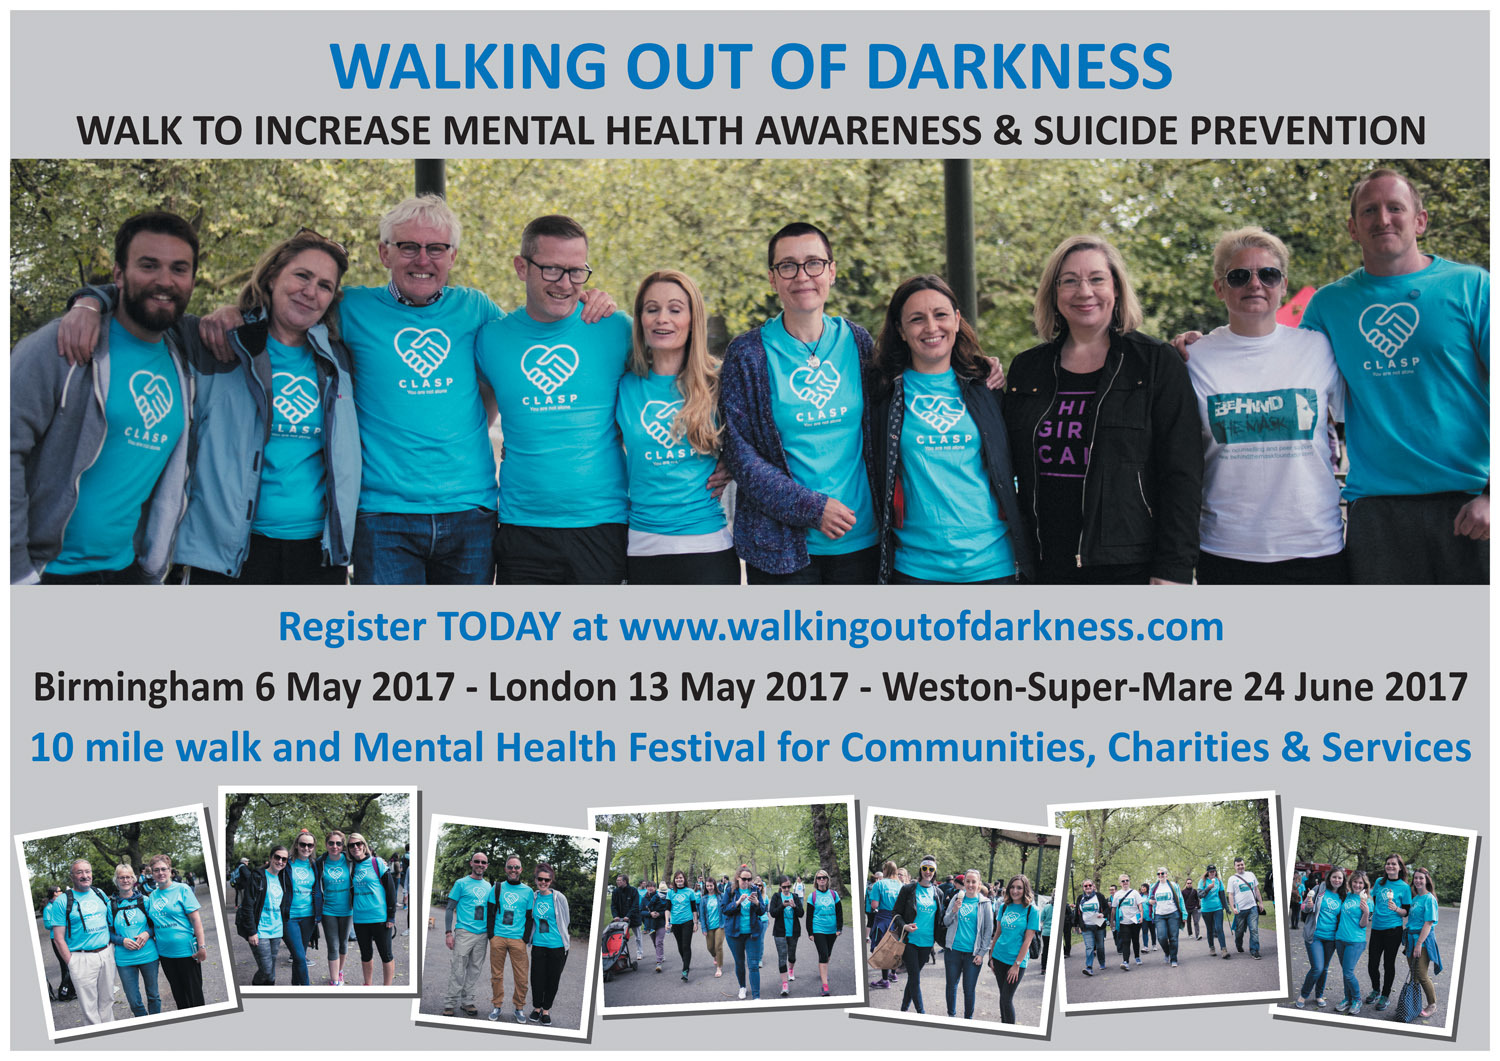 People can register now to join in Walking Out Of Darkness